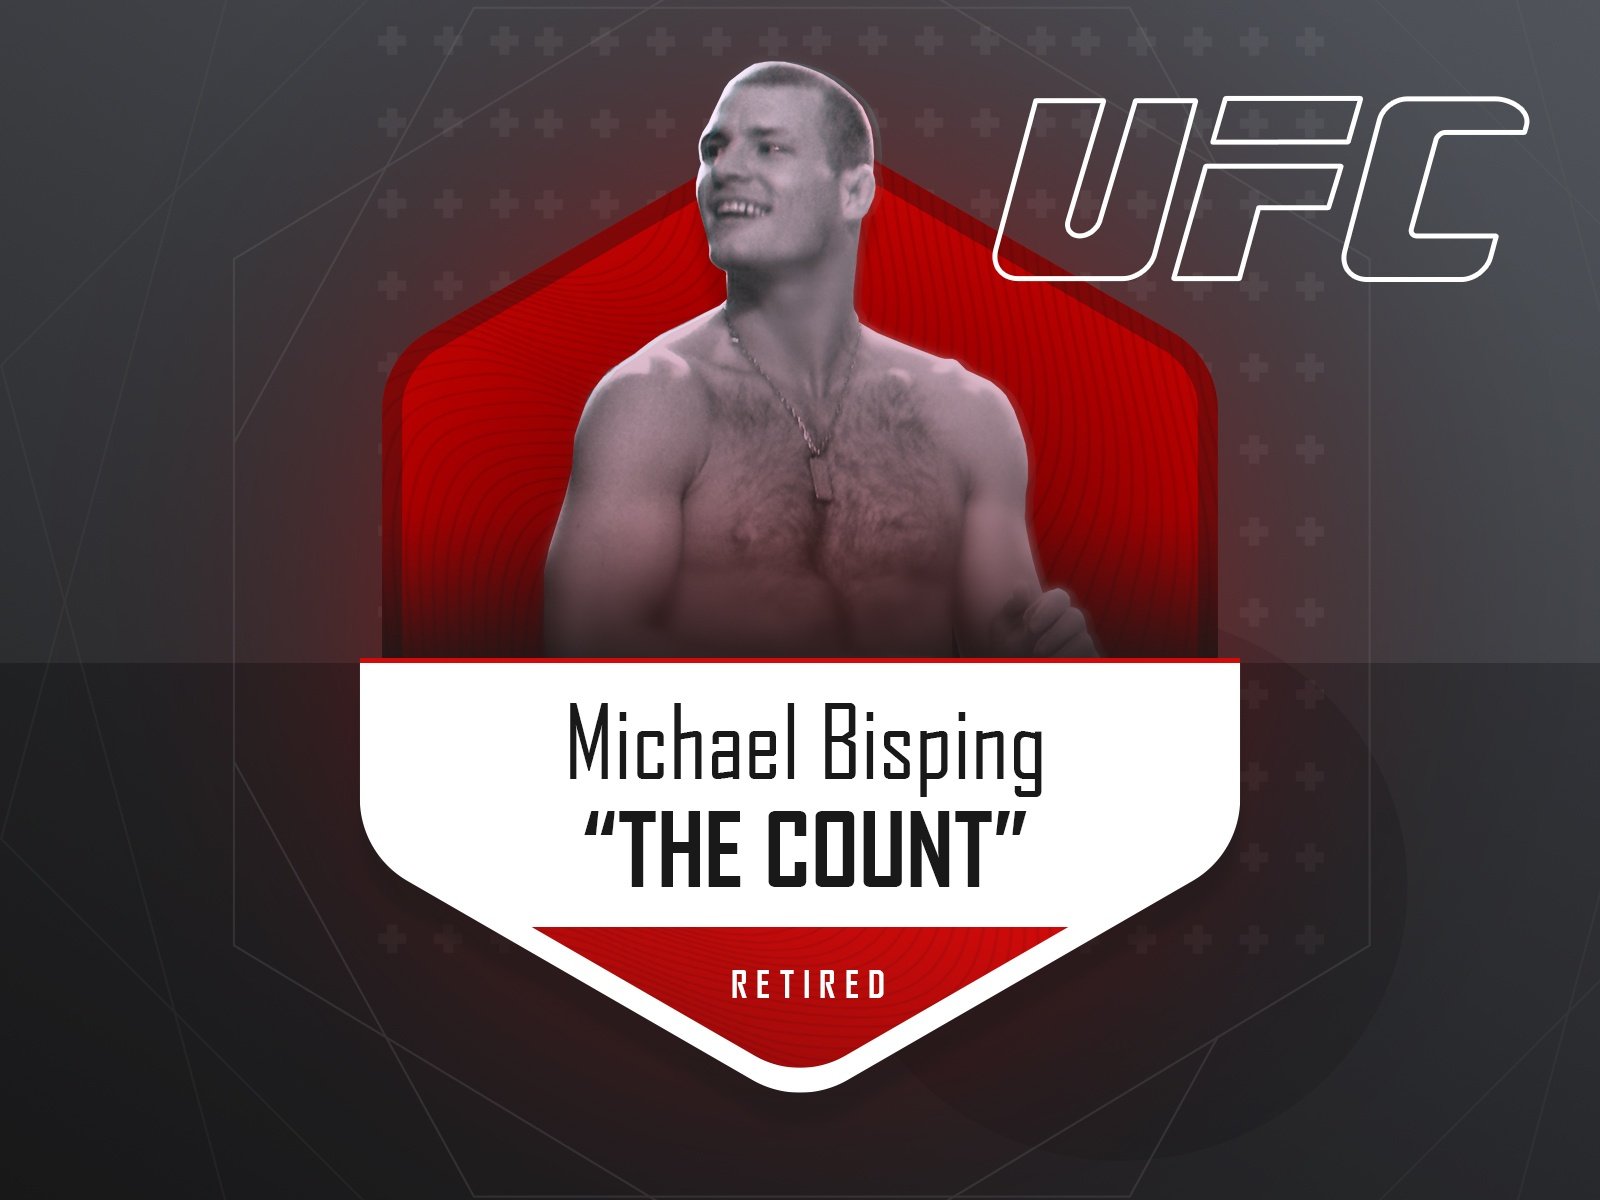 Michael Bisping - UFC fighter